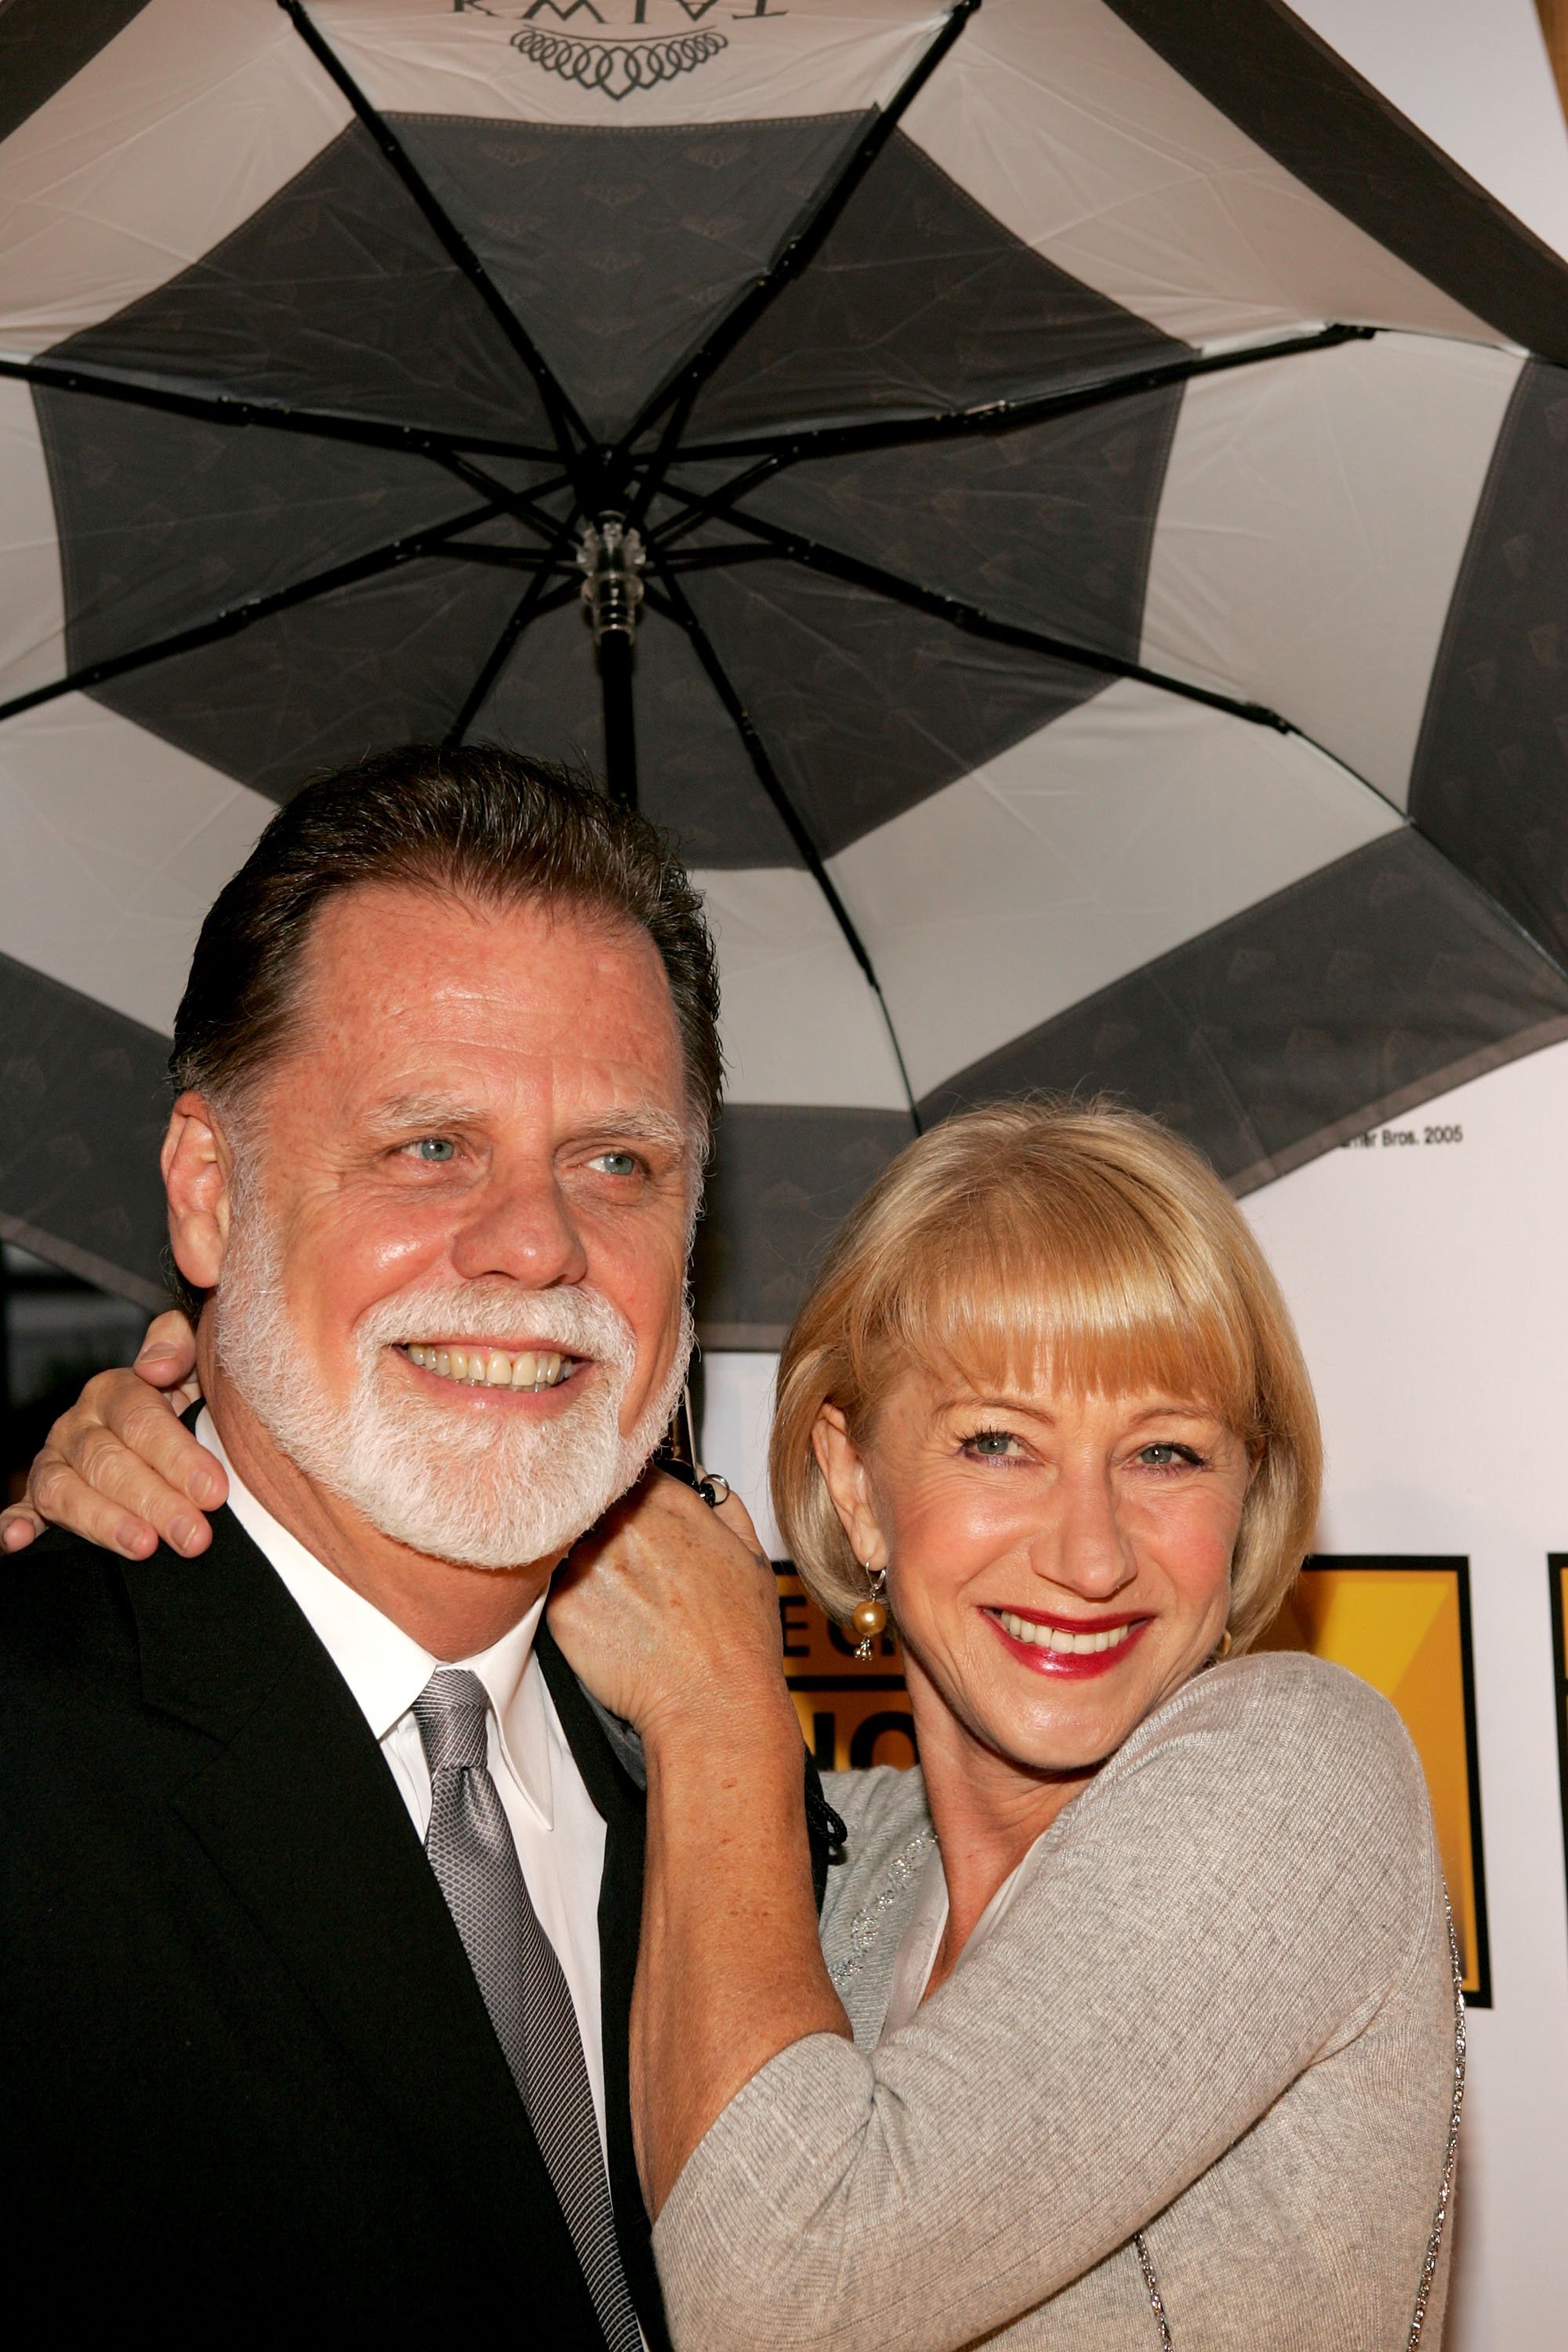 Taylor Hackford and Helen Mirren at the 10th Annual Critics' Choice Awards on January 10, 2005, in Los Angeles, California. | Source: Getty Images